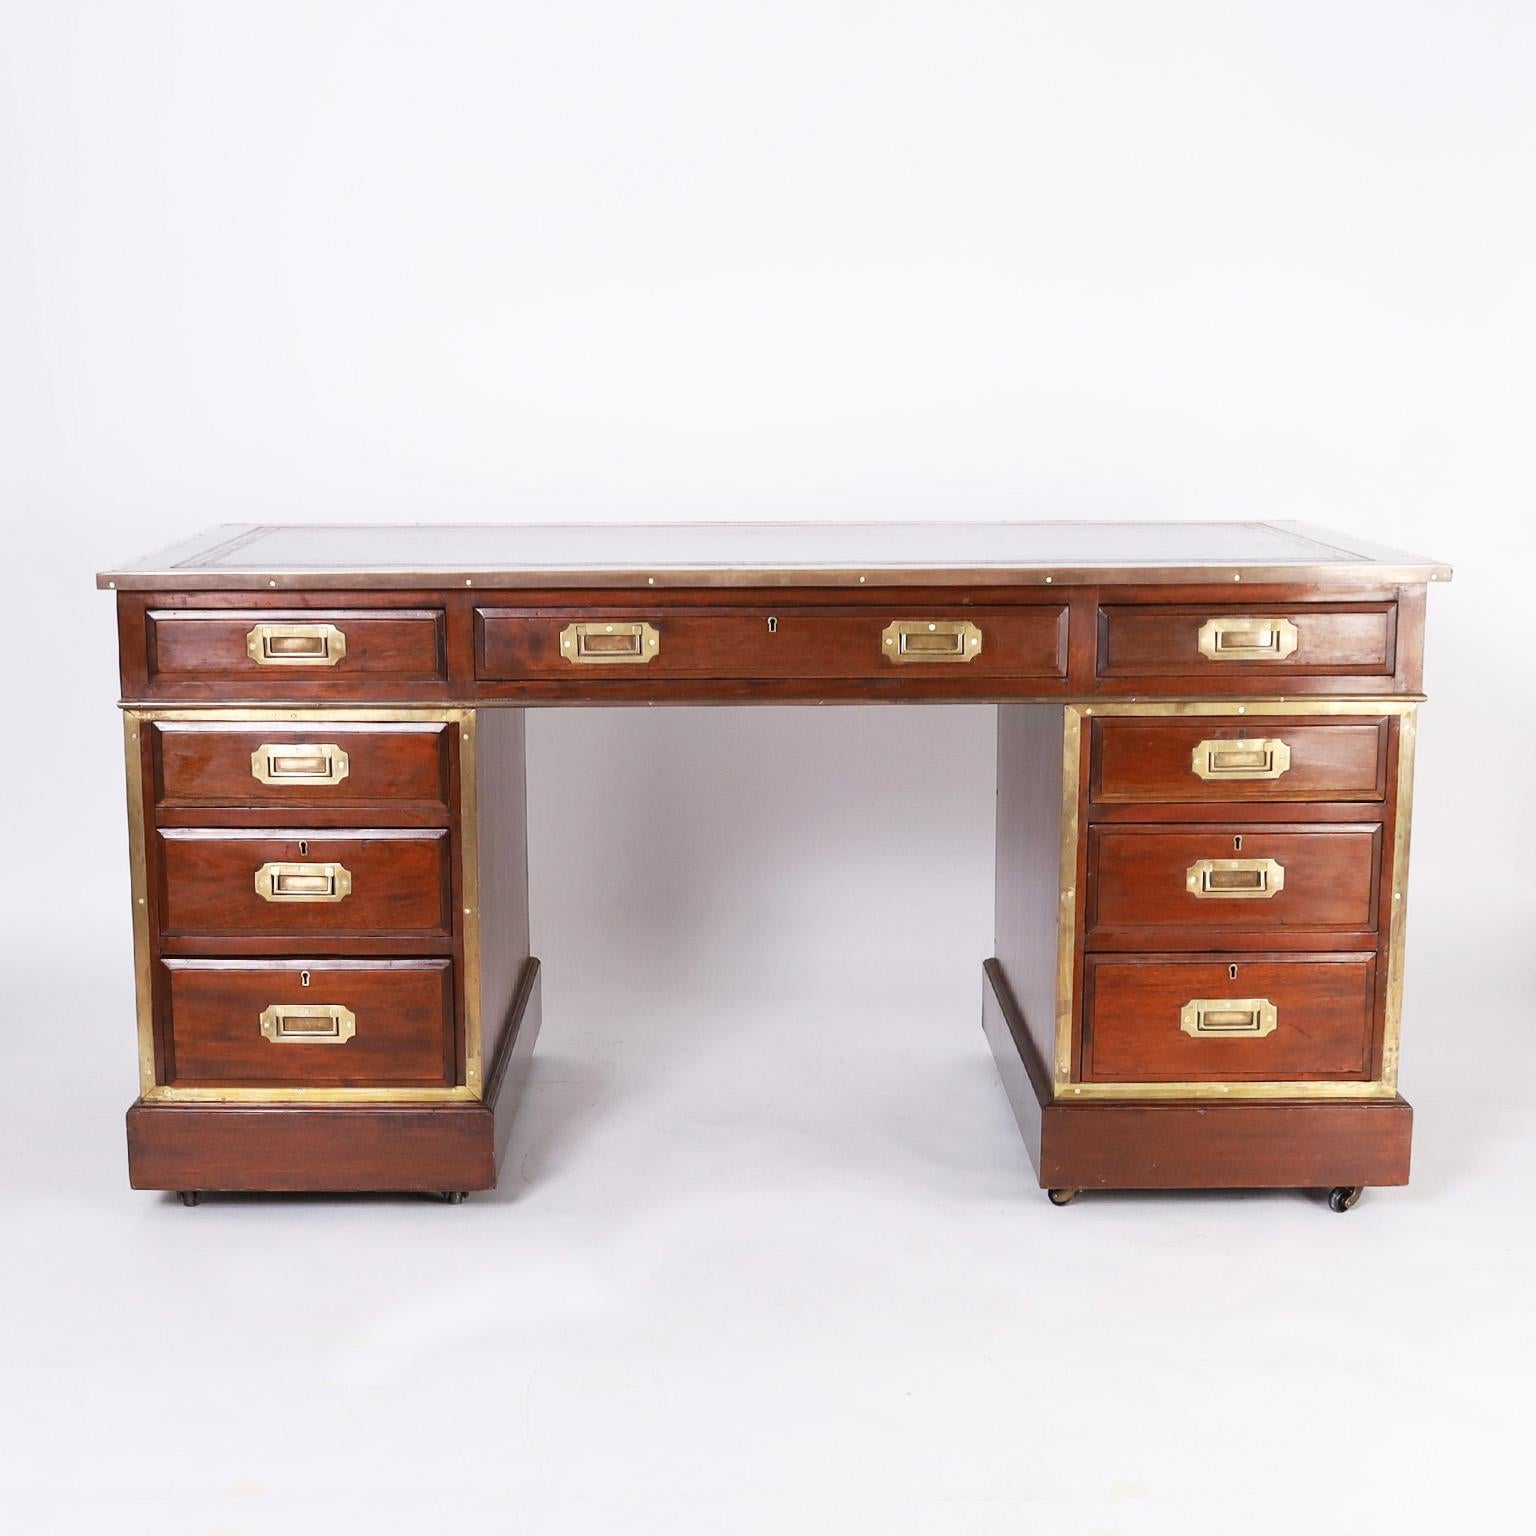 Impressive 19th century British colonial campaign desk crafted in mahogany and featuring a tooled brown leather top, brass campaign hardware, beveled drawer fronts, and block feet elevated by inset casters.